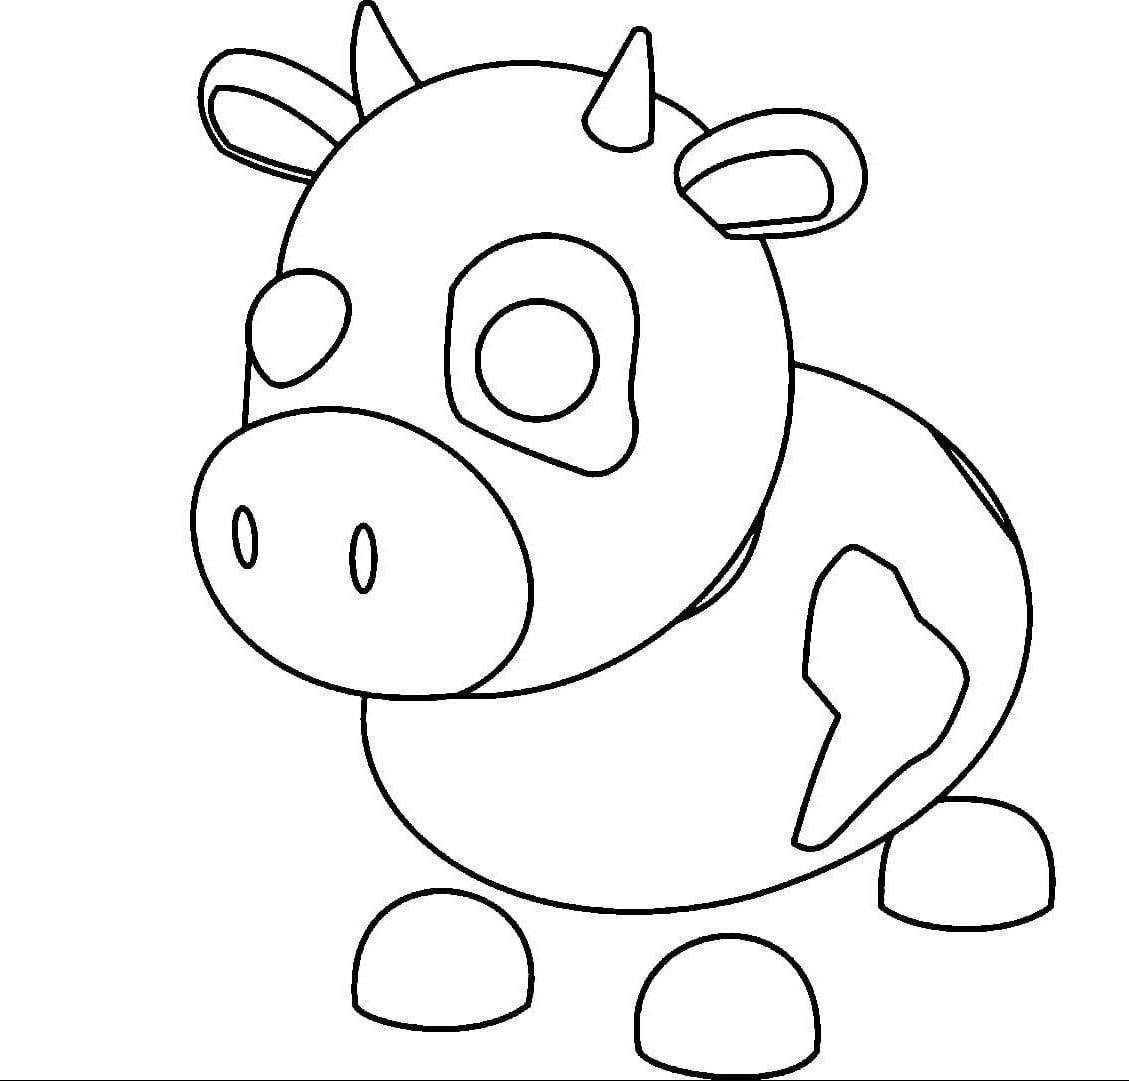 Adopt Me Coloring Pages - 1NZA